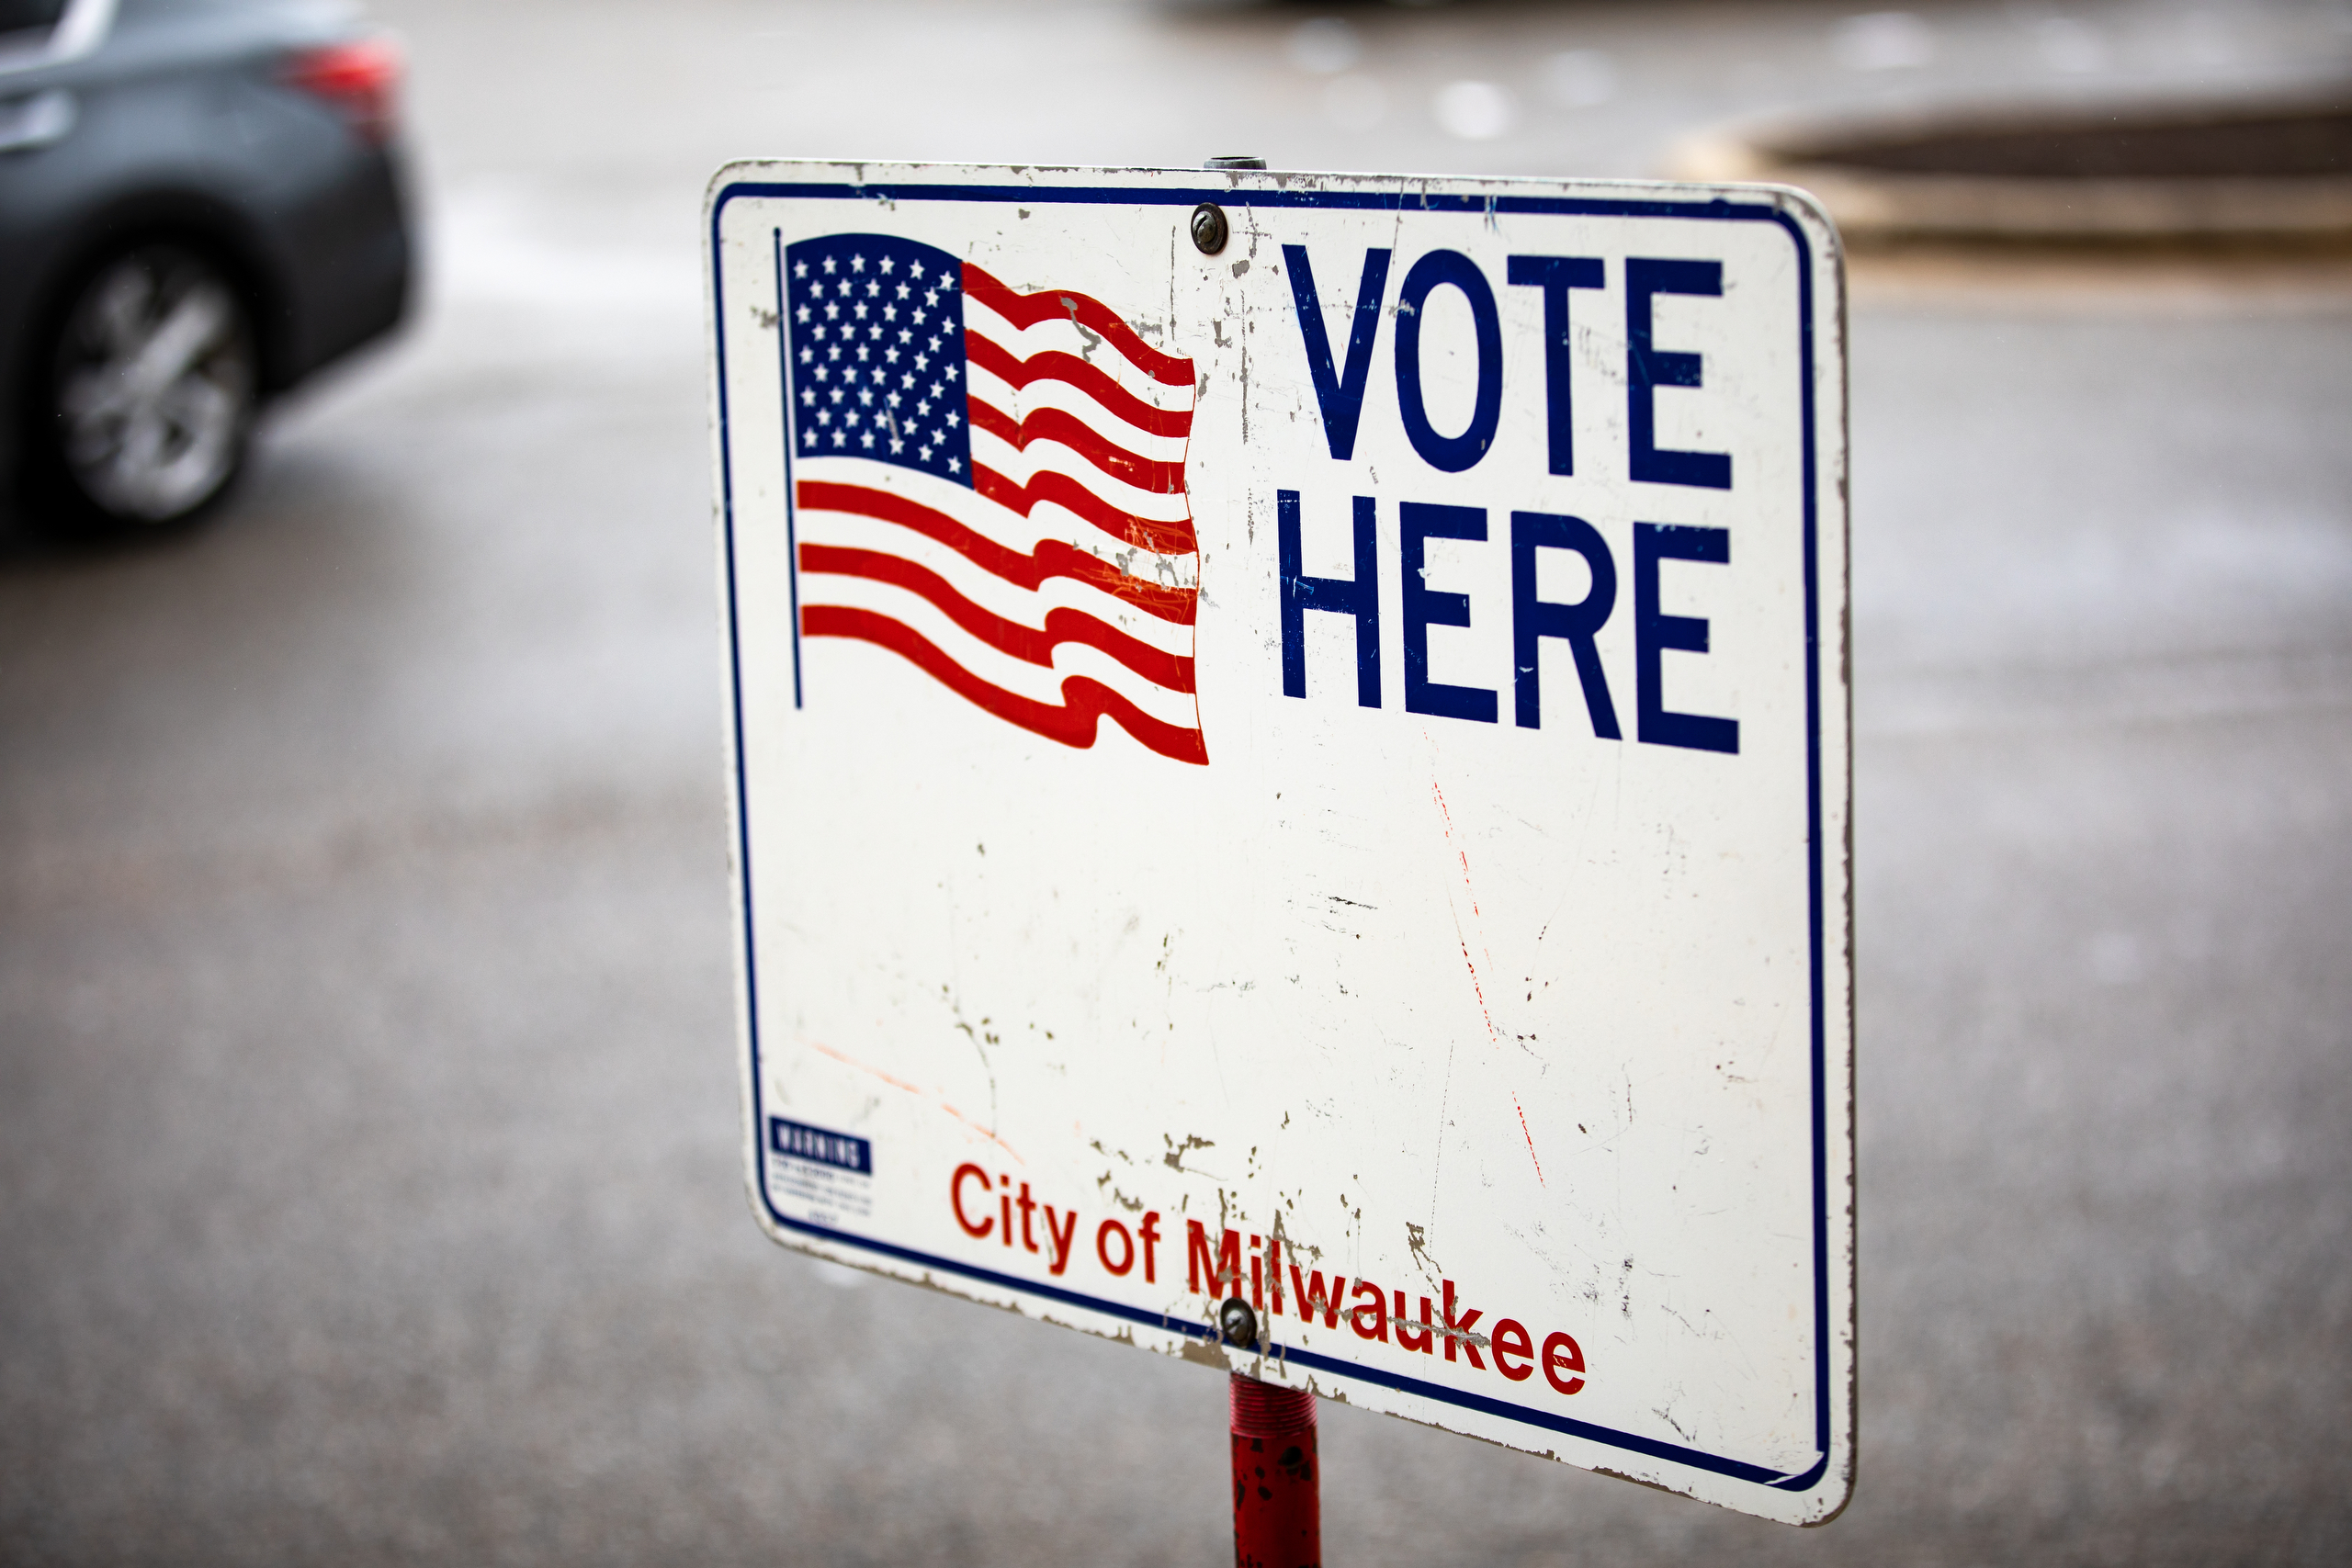 Early voting location at Midtown Shopping Center in Milwaukee